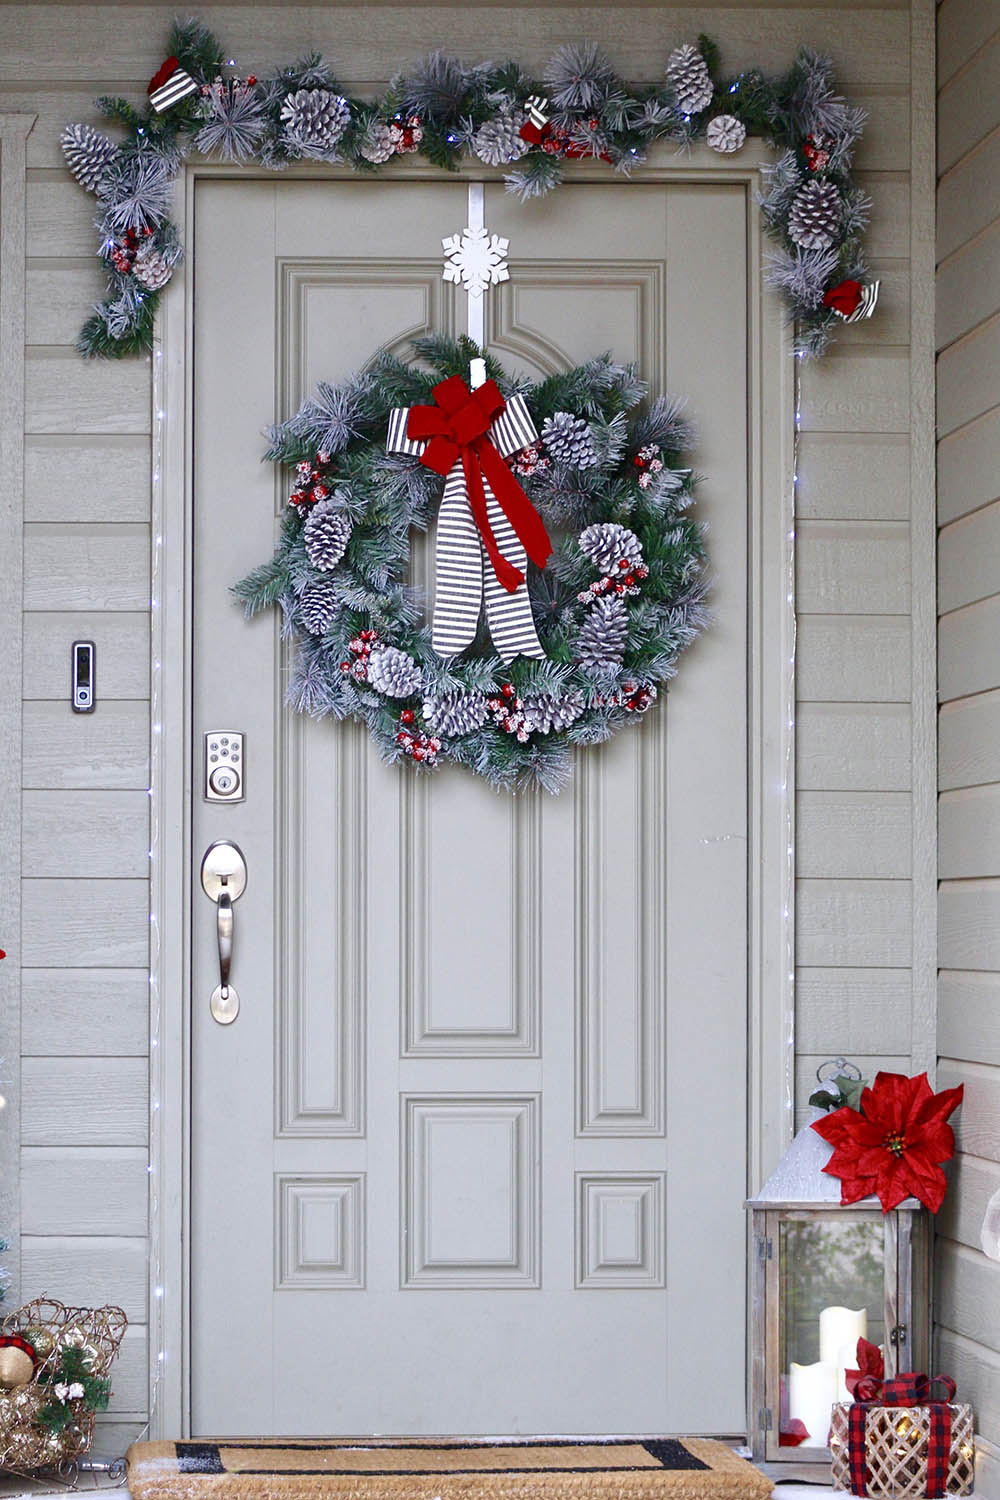 Garland Christmas Gate Ornaments Decoration Christmas out door behind door 